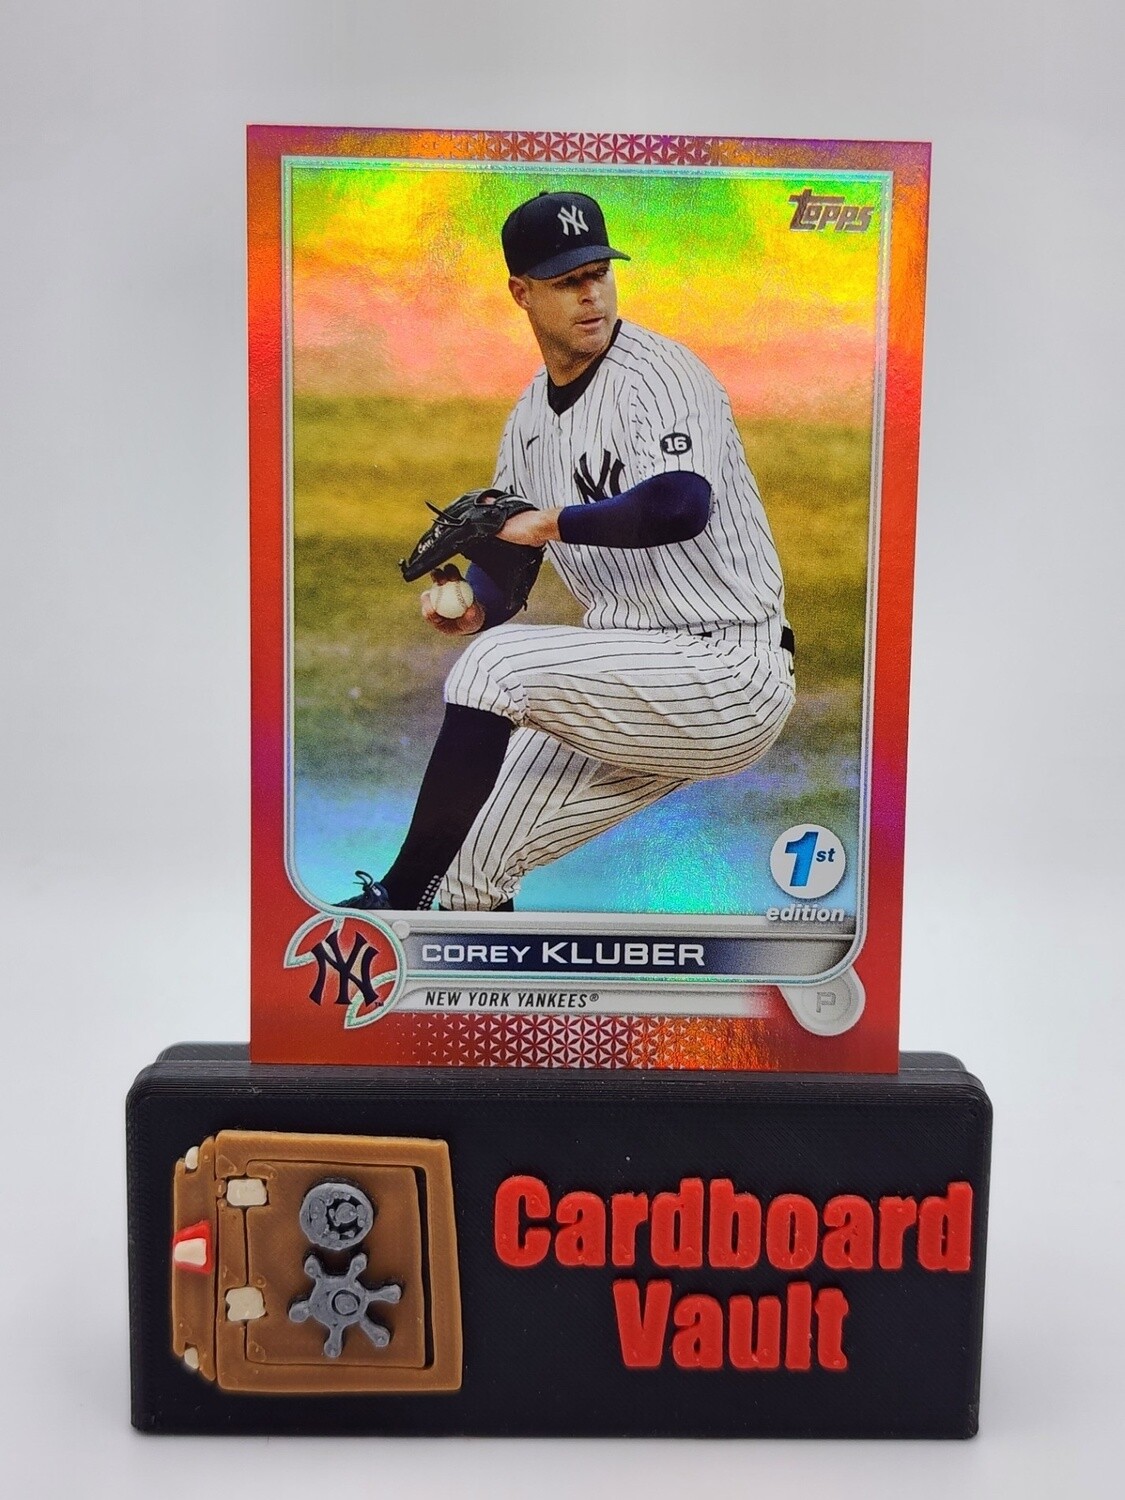 2022 Topps 1st Edition Corey Kluber #69 Red Foil 45/50